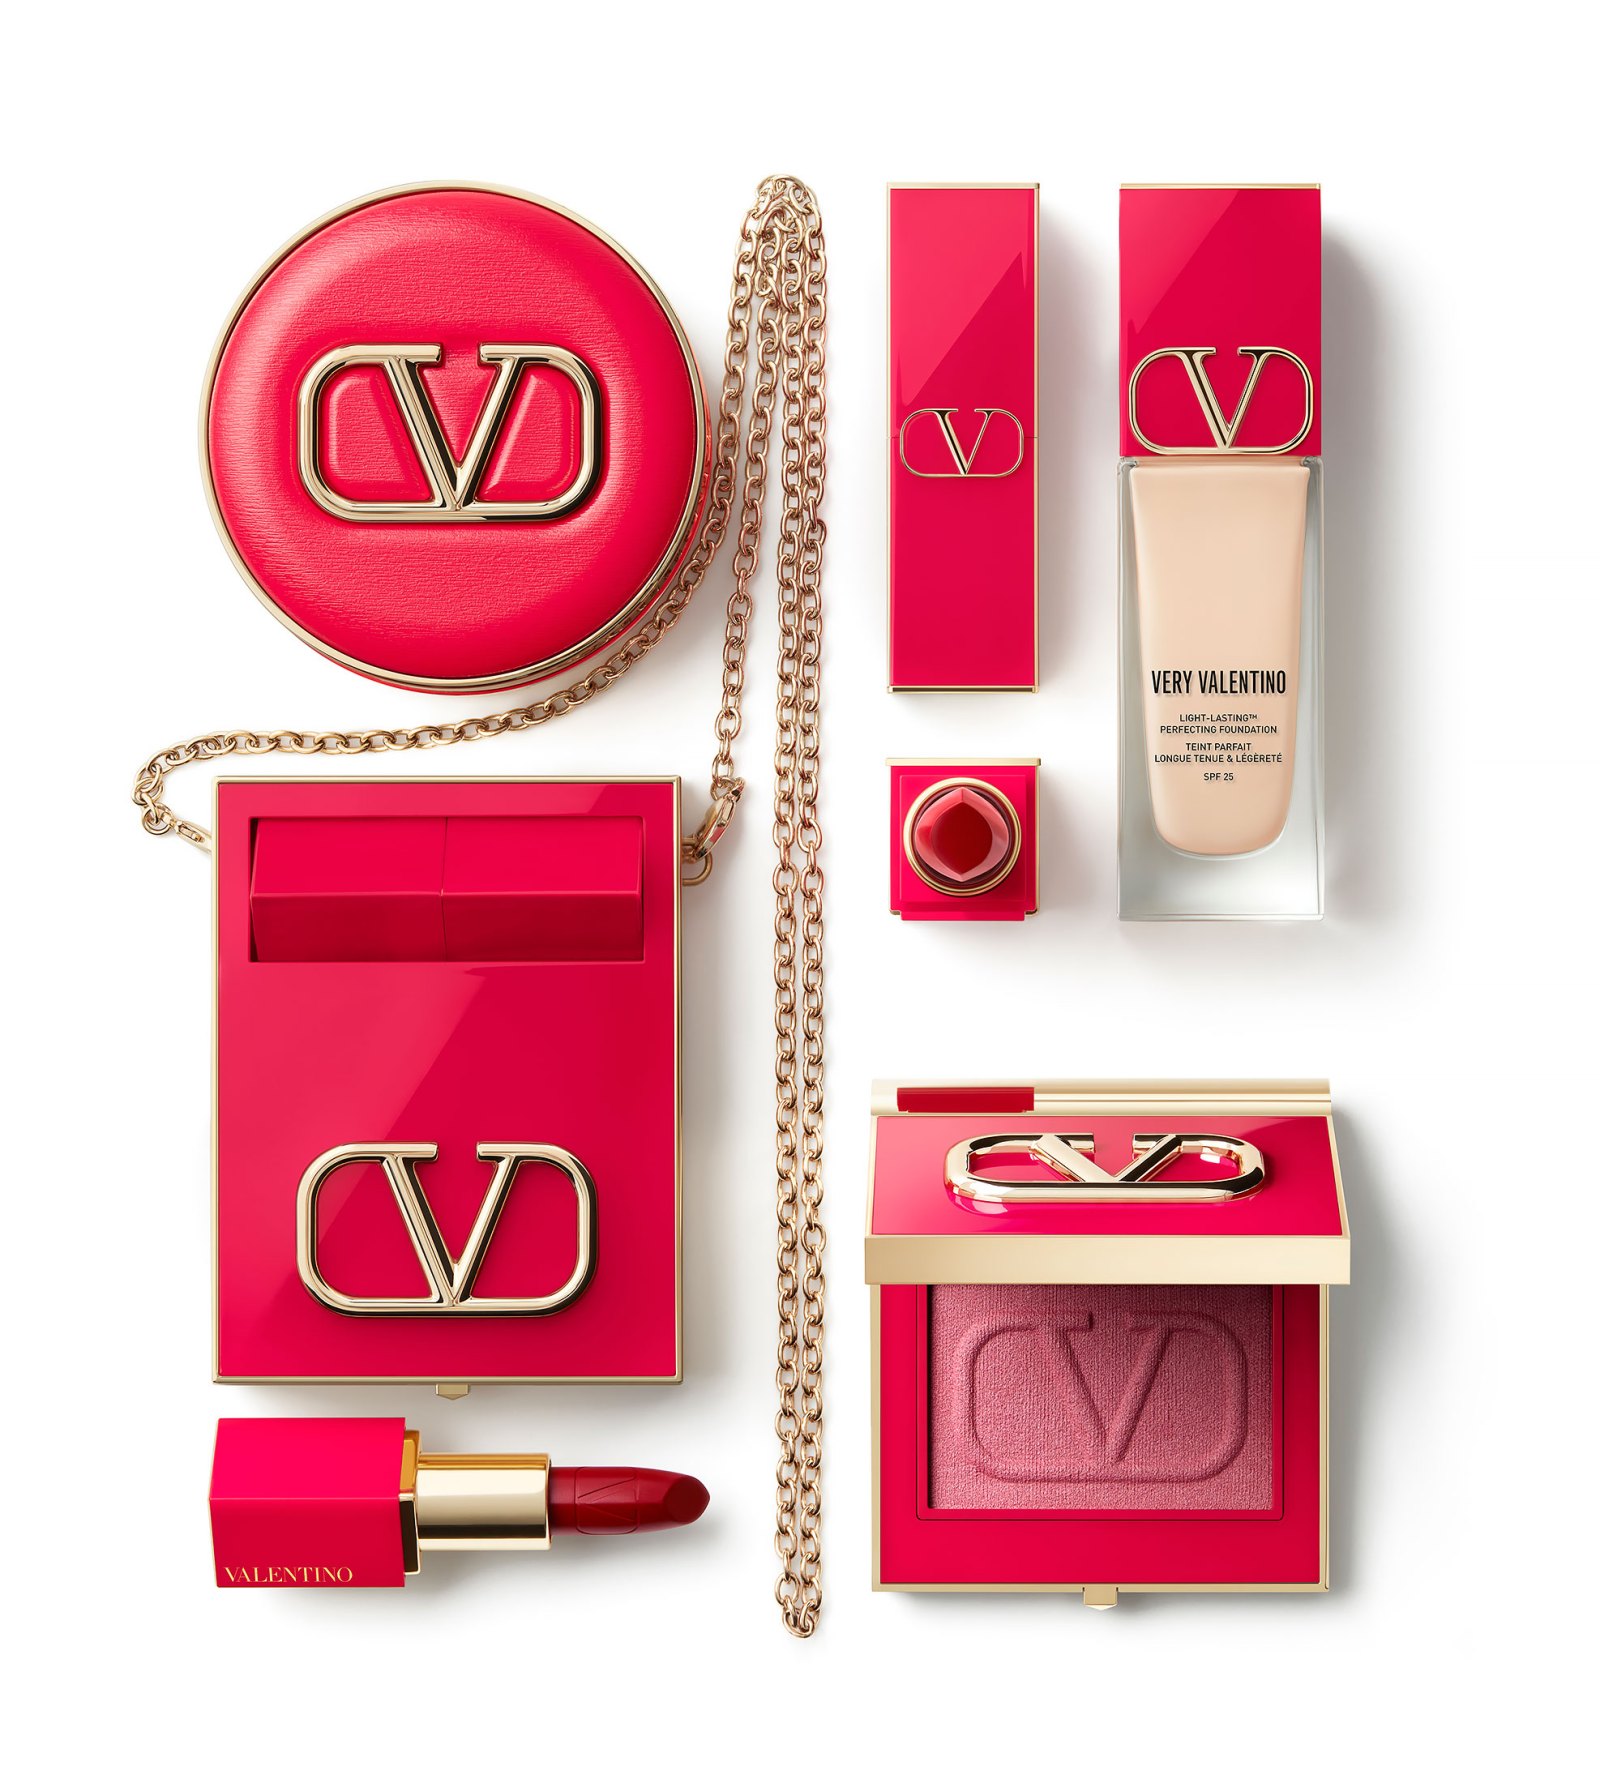 Valentino Makeup Products Price Details 2398